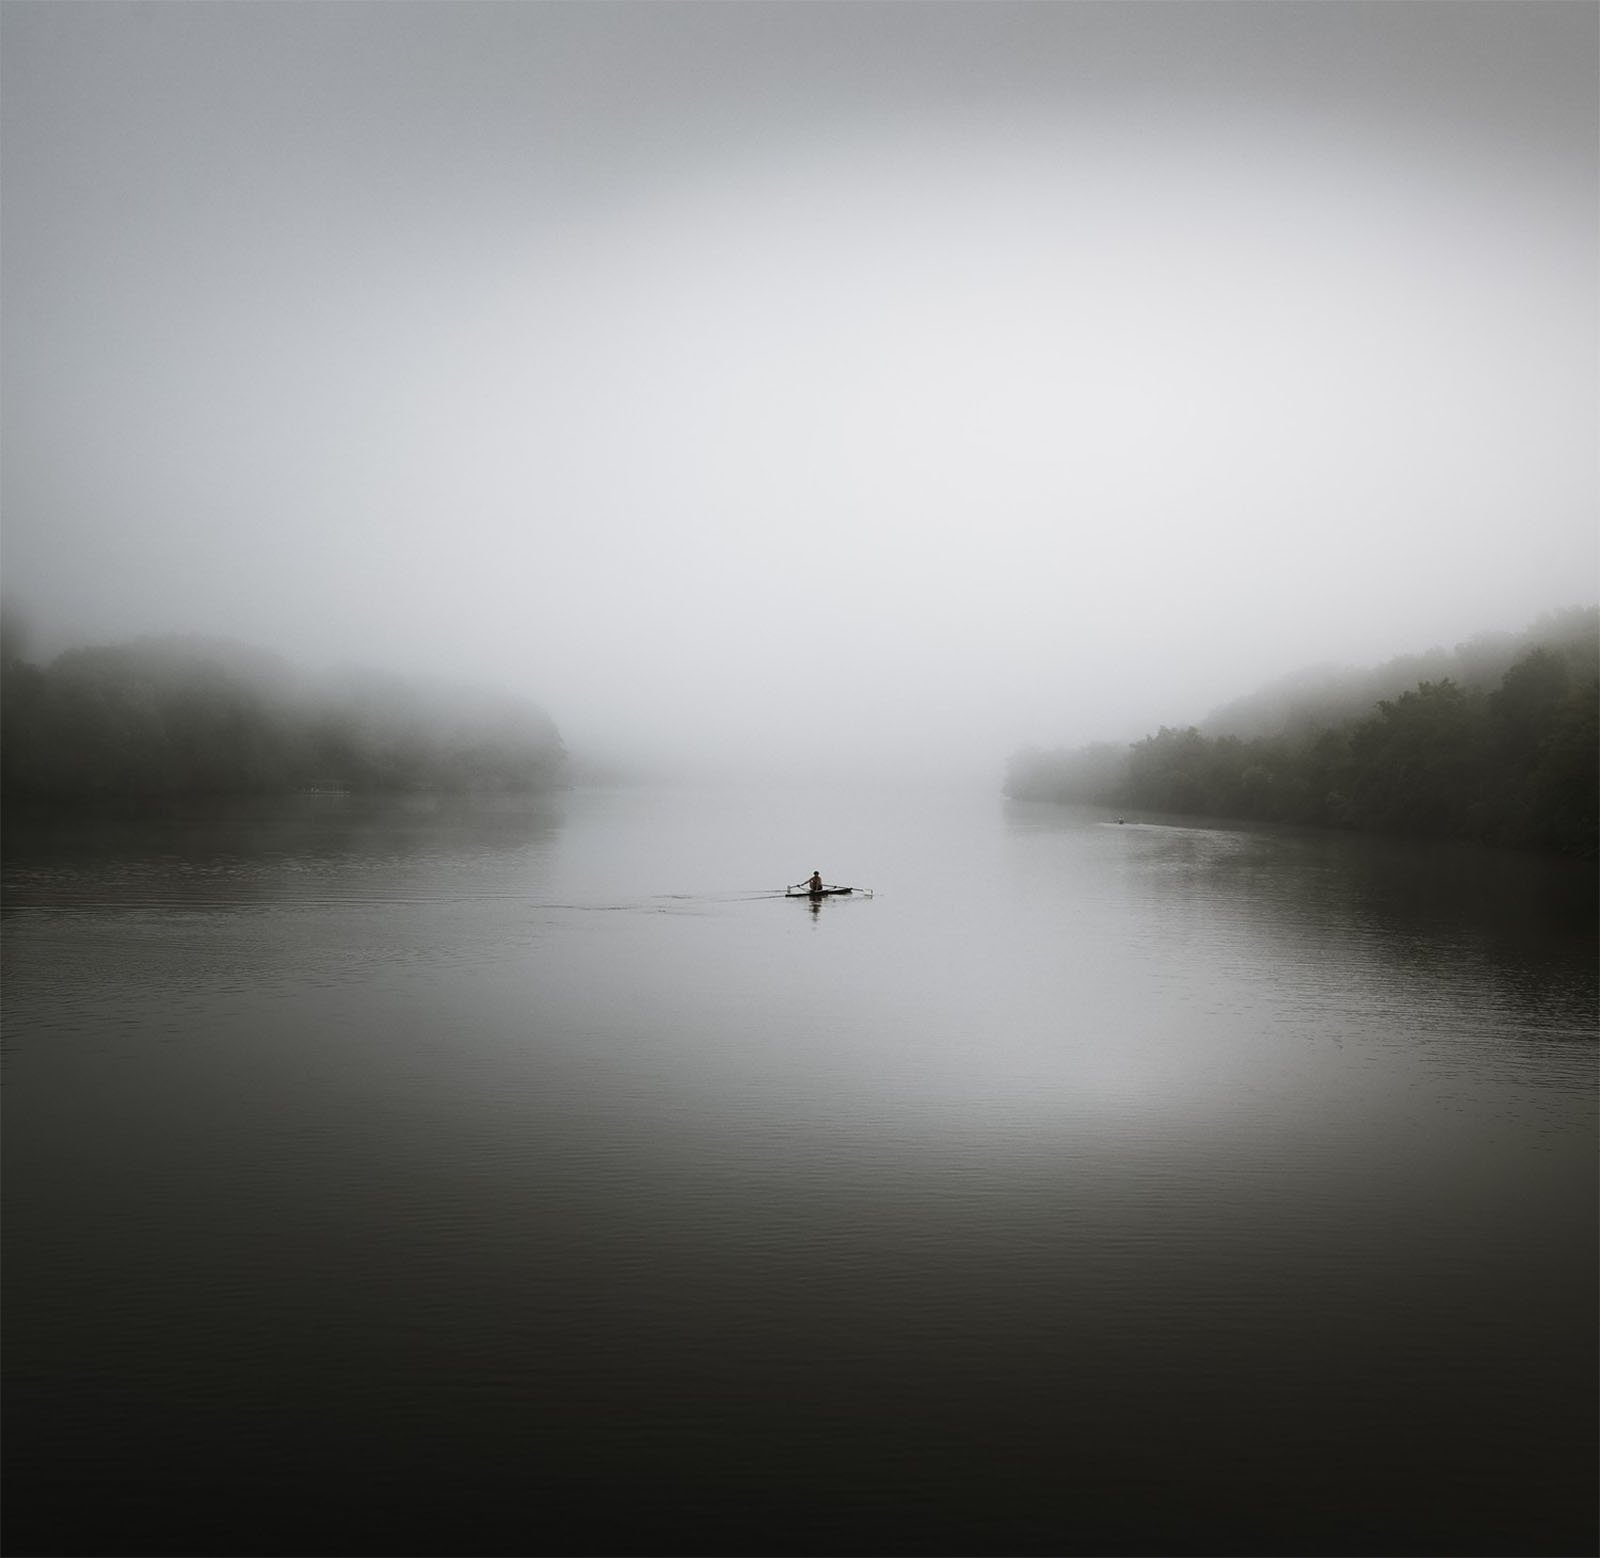 A lone person paddles a small canoe across a calm, misty lake. The dense fog creates a serene and mysterious atmosphere, with barely visible shoreline trees in the distance. The scene is tranquil and moody, evoking a sense of solitude and peacefulness.